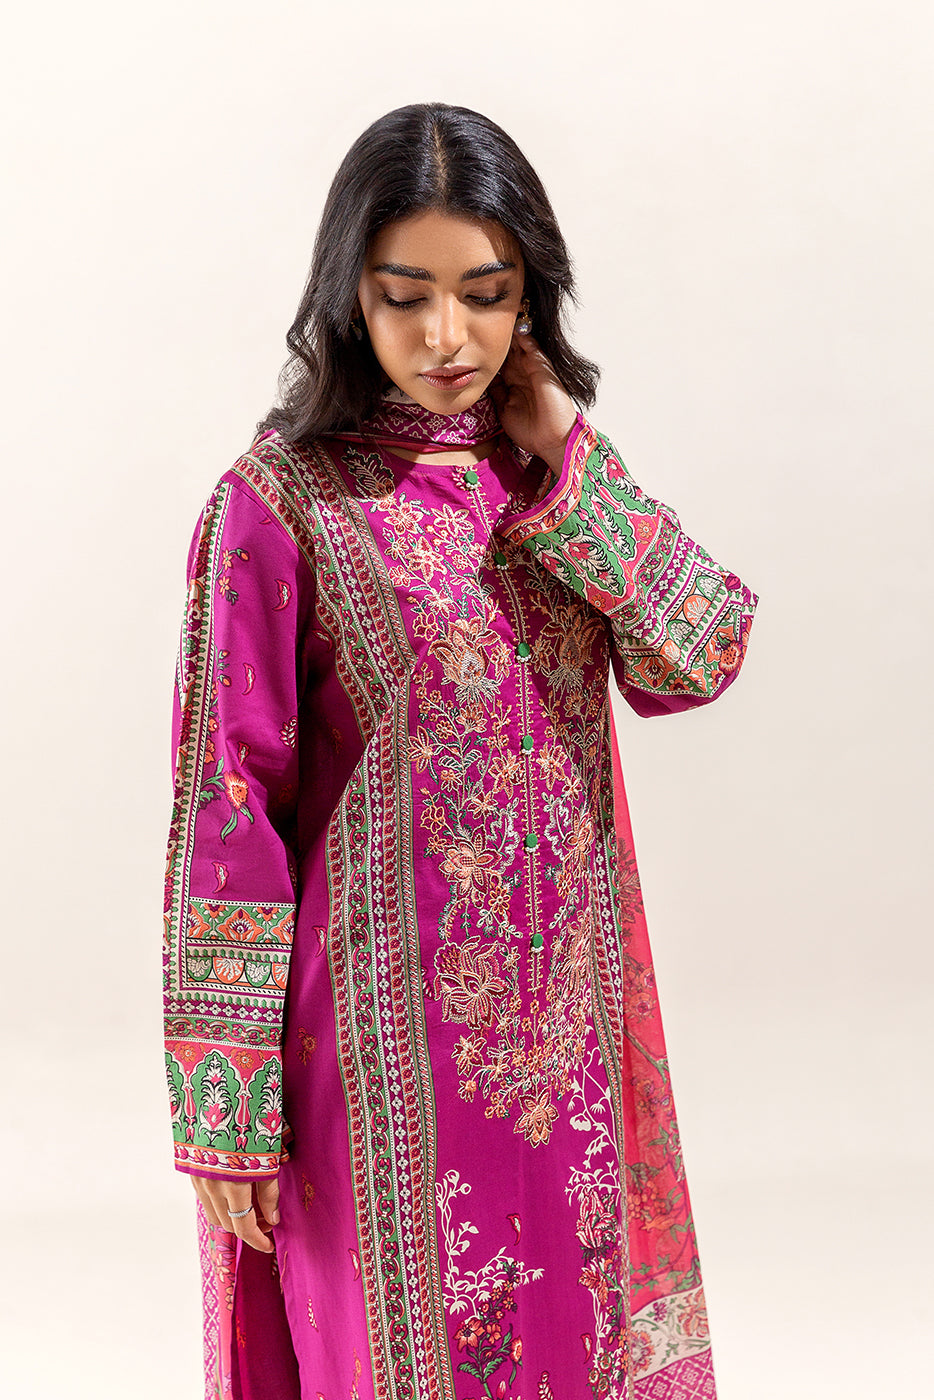 2 PIECE - EMBROIDERED LAWN SUIT - AMETHYST PEACH (UNSTITCHED) - BEECHTREE